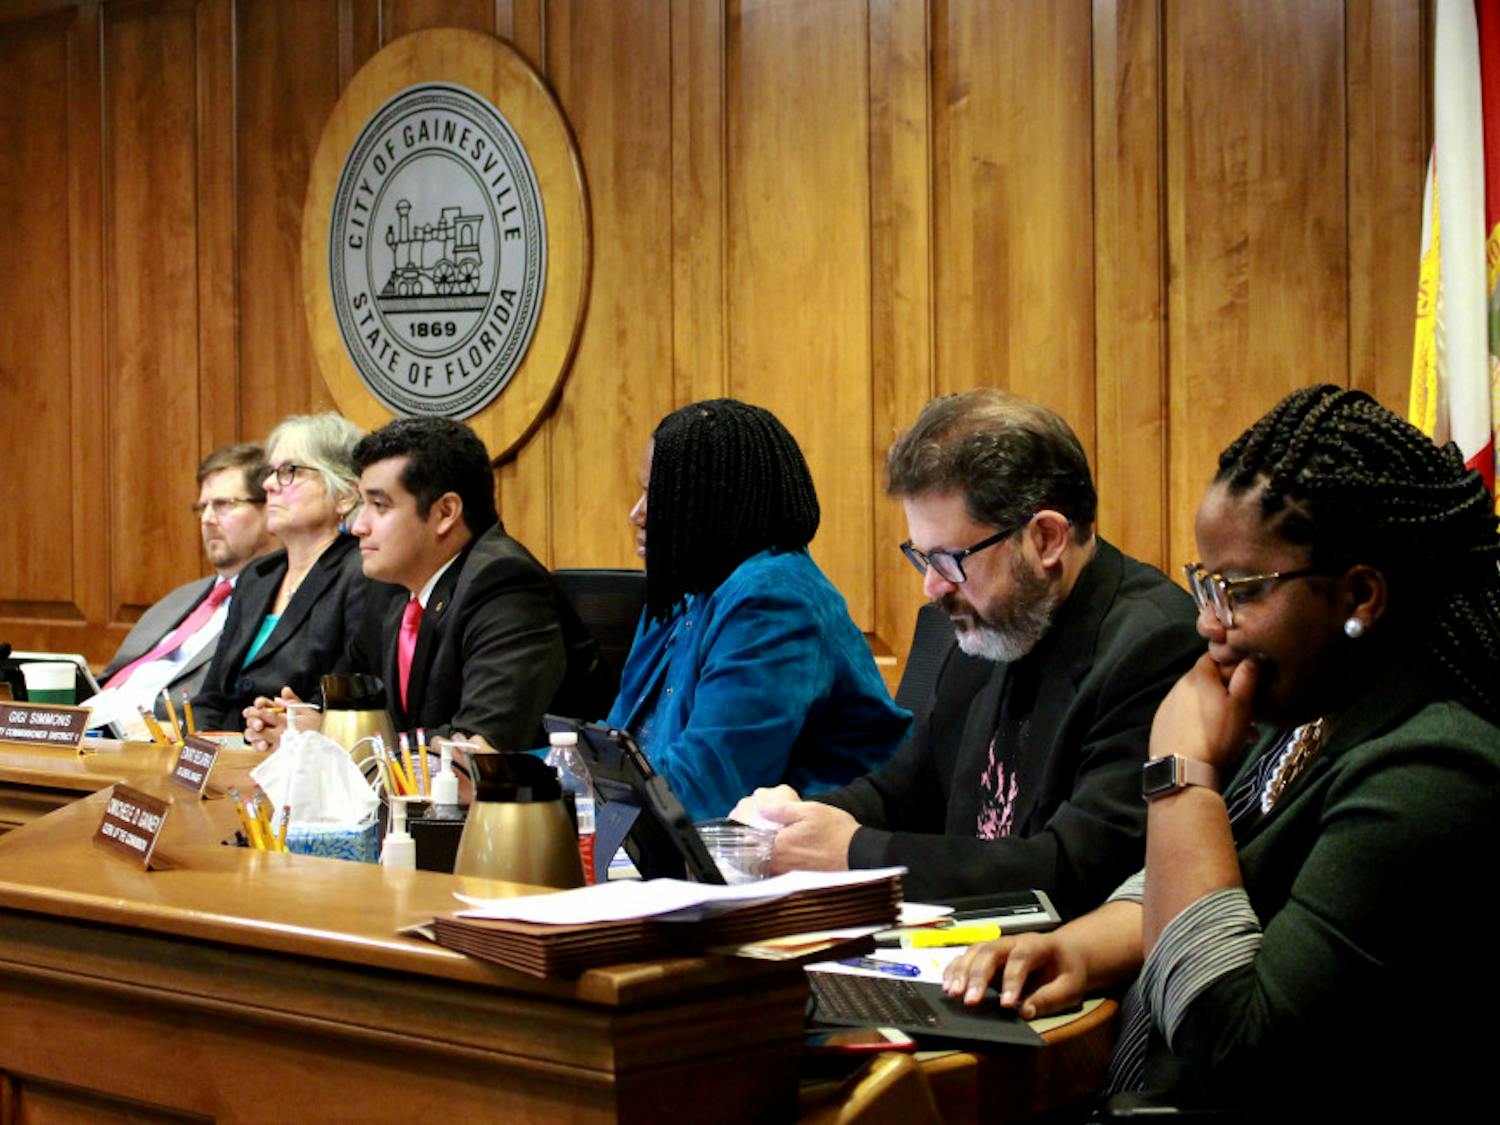 Mayor Lauren Poe, Gainesville city commissioners and city staff listen to the public’s comments Jan. 18, 2019, during the Gainesville City Commission meeting at City Hall. The meeting was over four hours long, and the panel of legislators passed legislation that banned the use of plastic bags in Gainesville. 